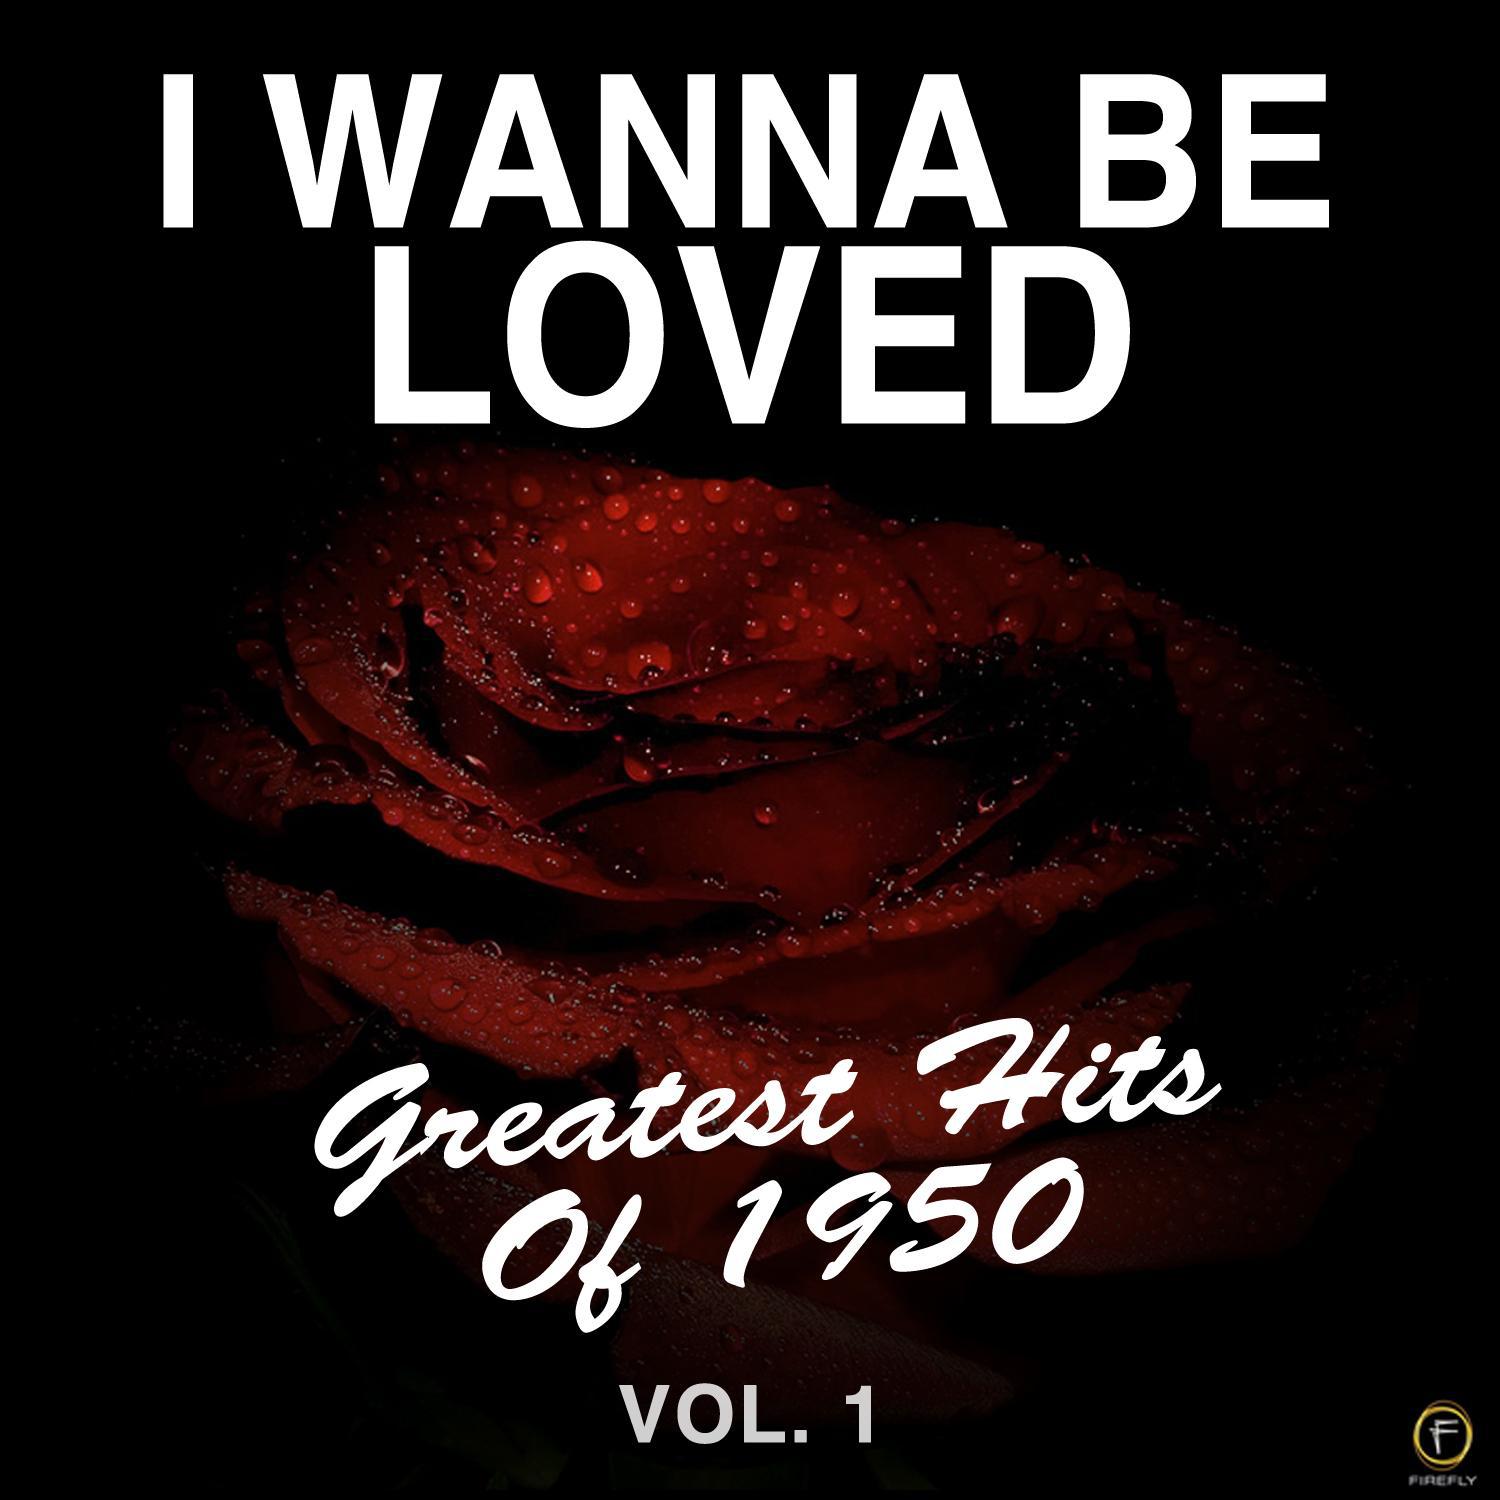 I Wanna Be Loved, Greatest Hits of 1950-Vol. 1